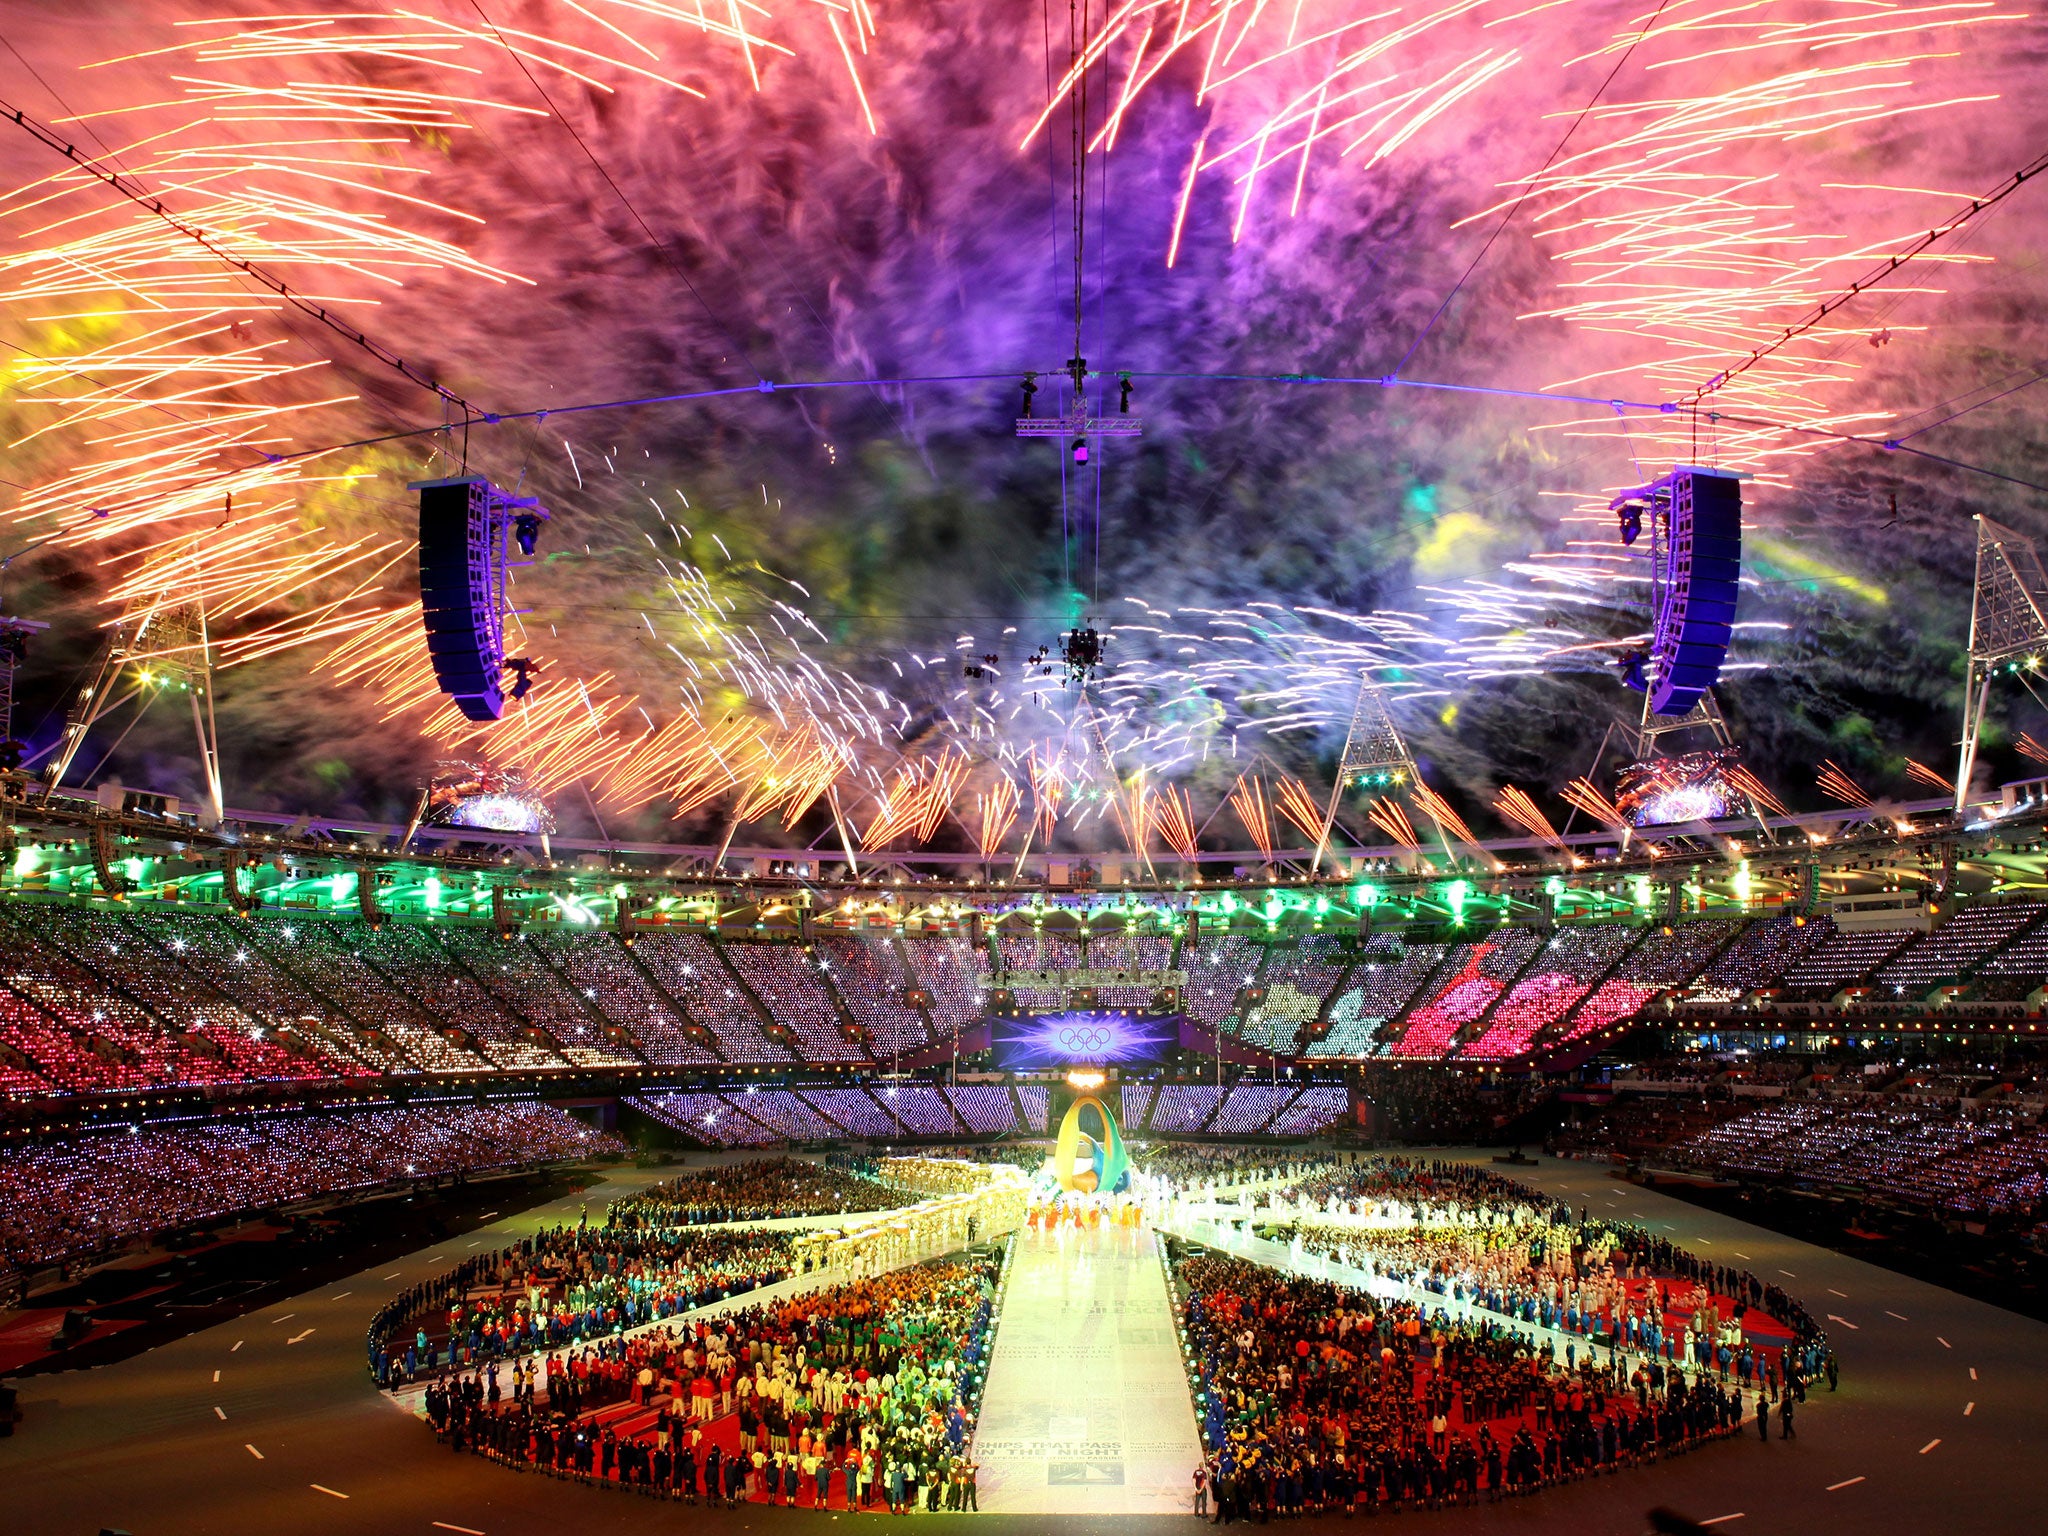 Fireworks explode over the stadium during the Closing Ceremony on Day 16 of the London 2012 Olympic Games at Olympic Stadium